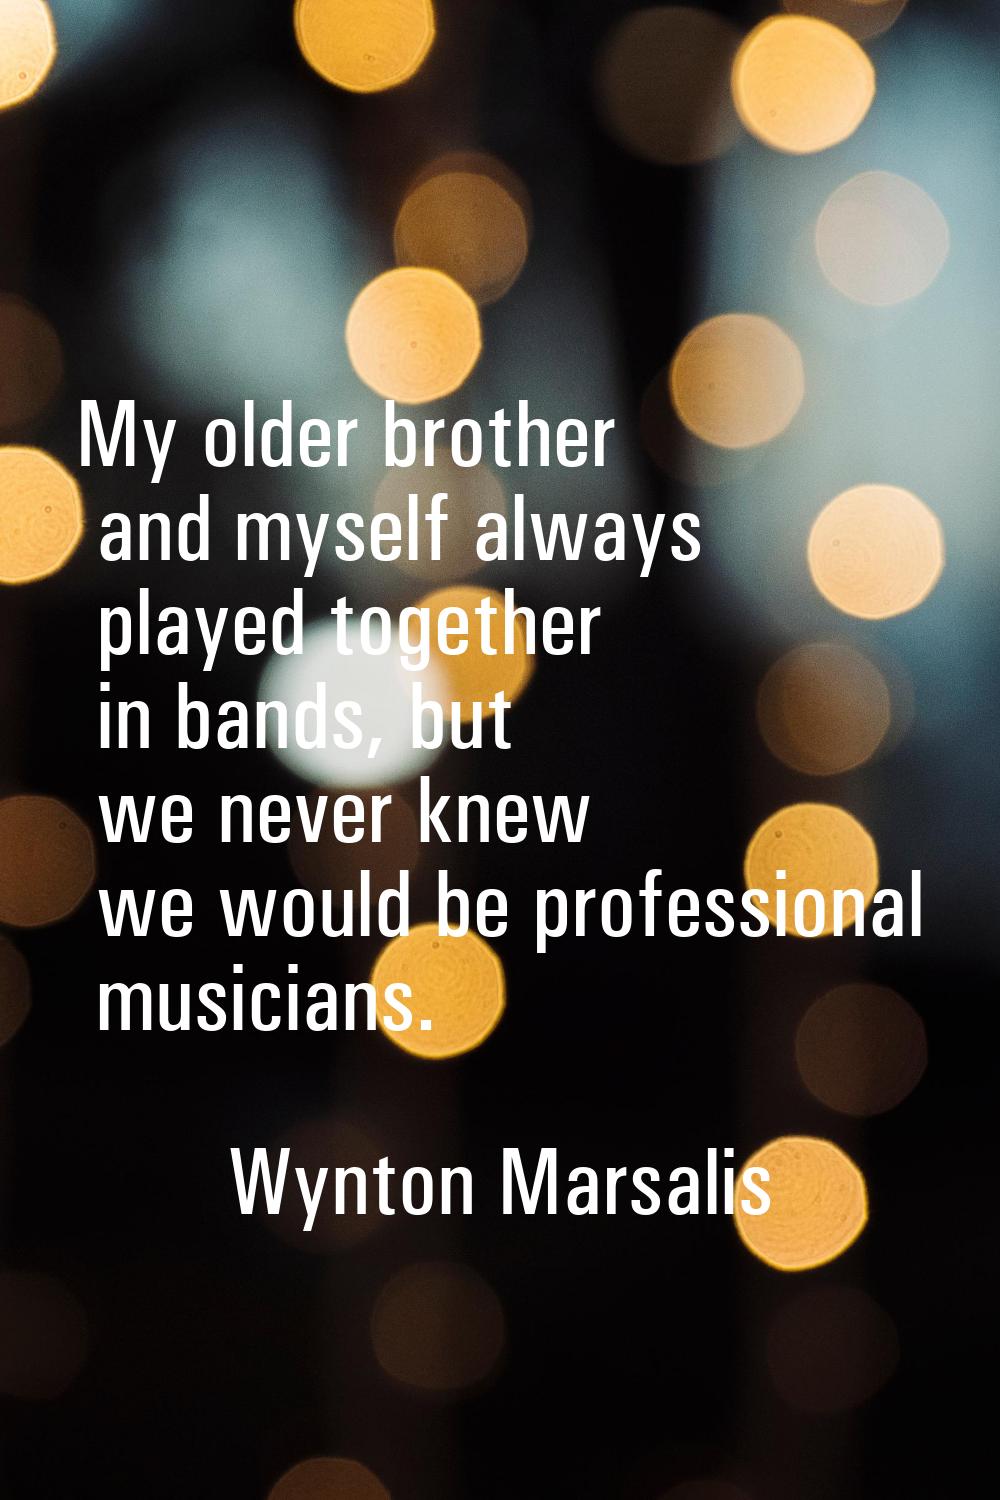 My older brother and myself always played together in bands, but we never knew we would be professi